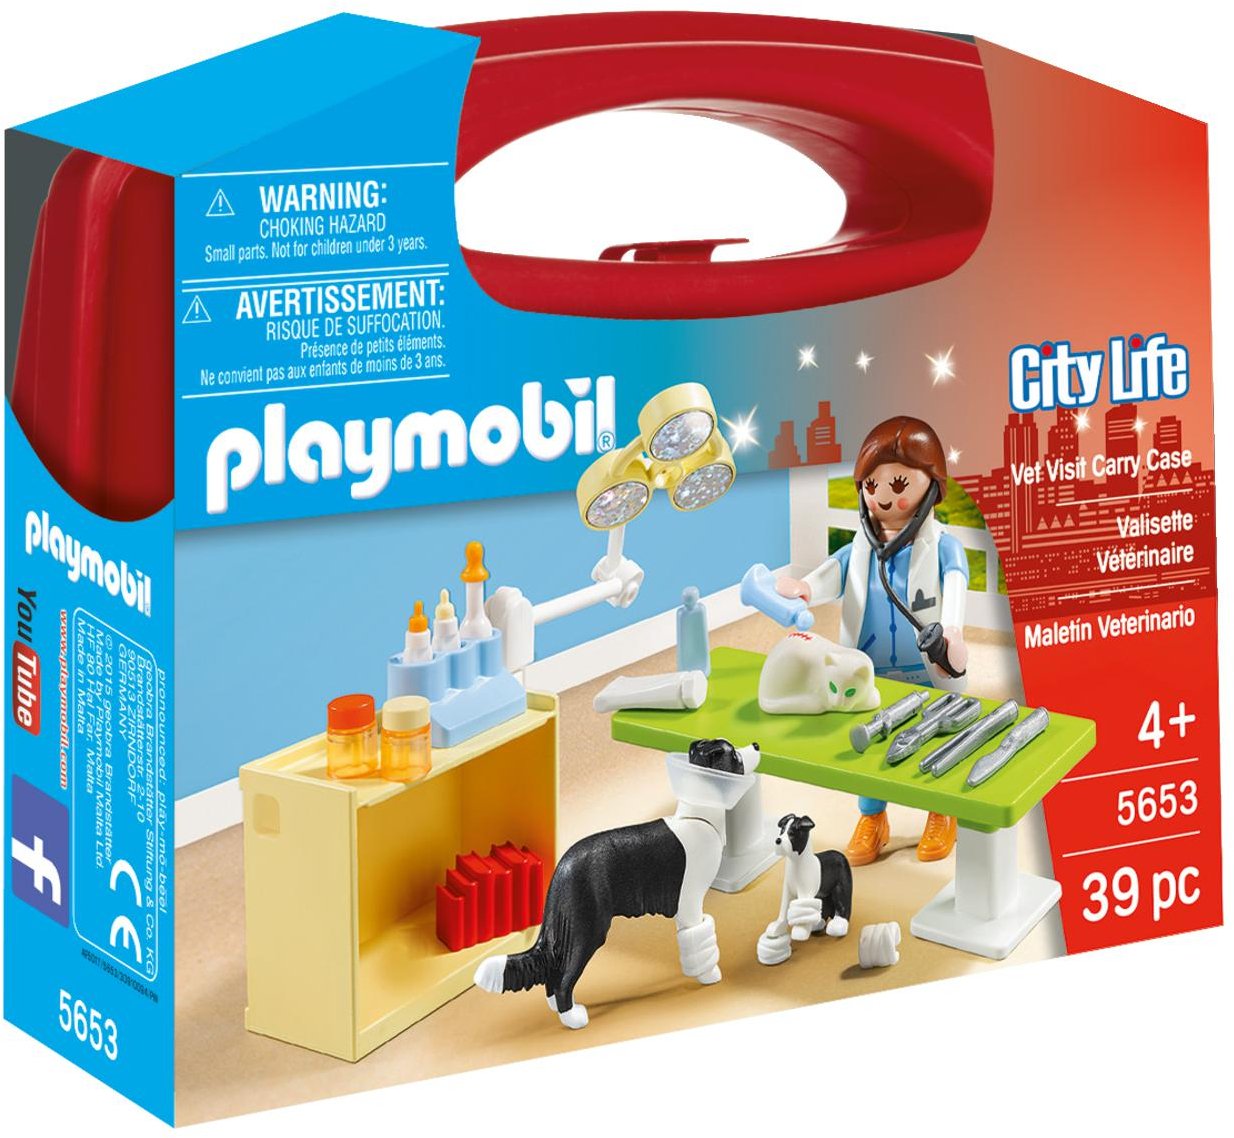 Playmobil 5653 City Life Collectable Vet Carry Case Toy